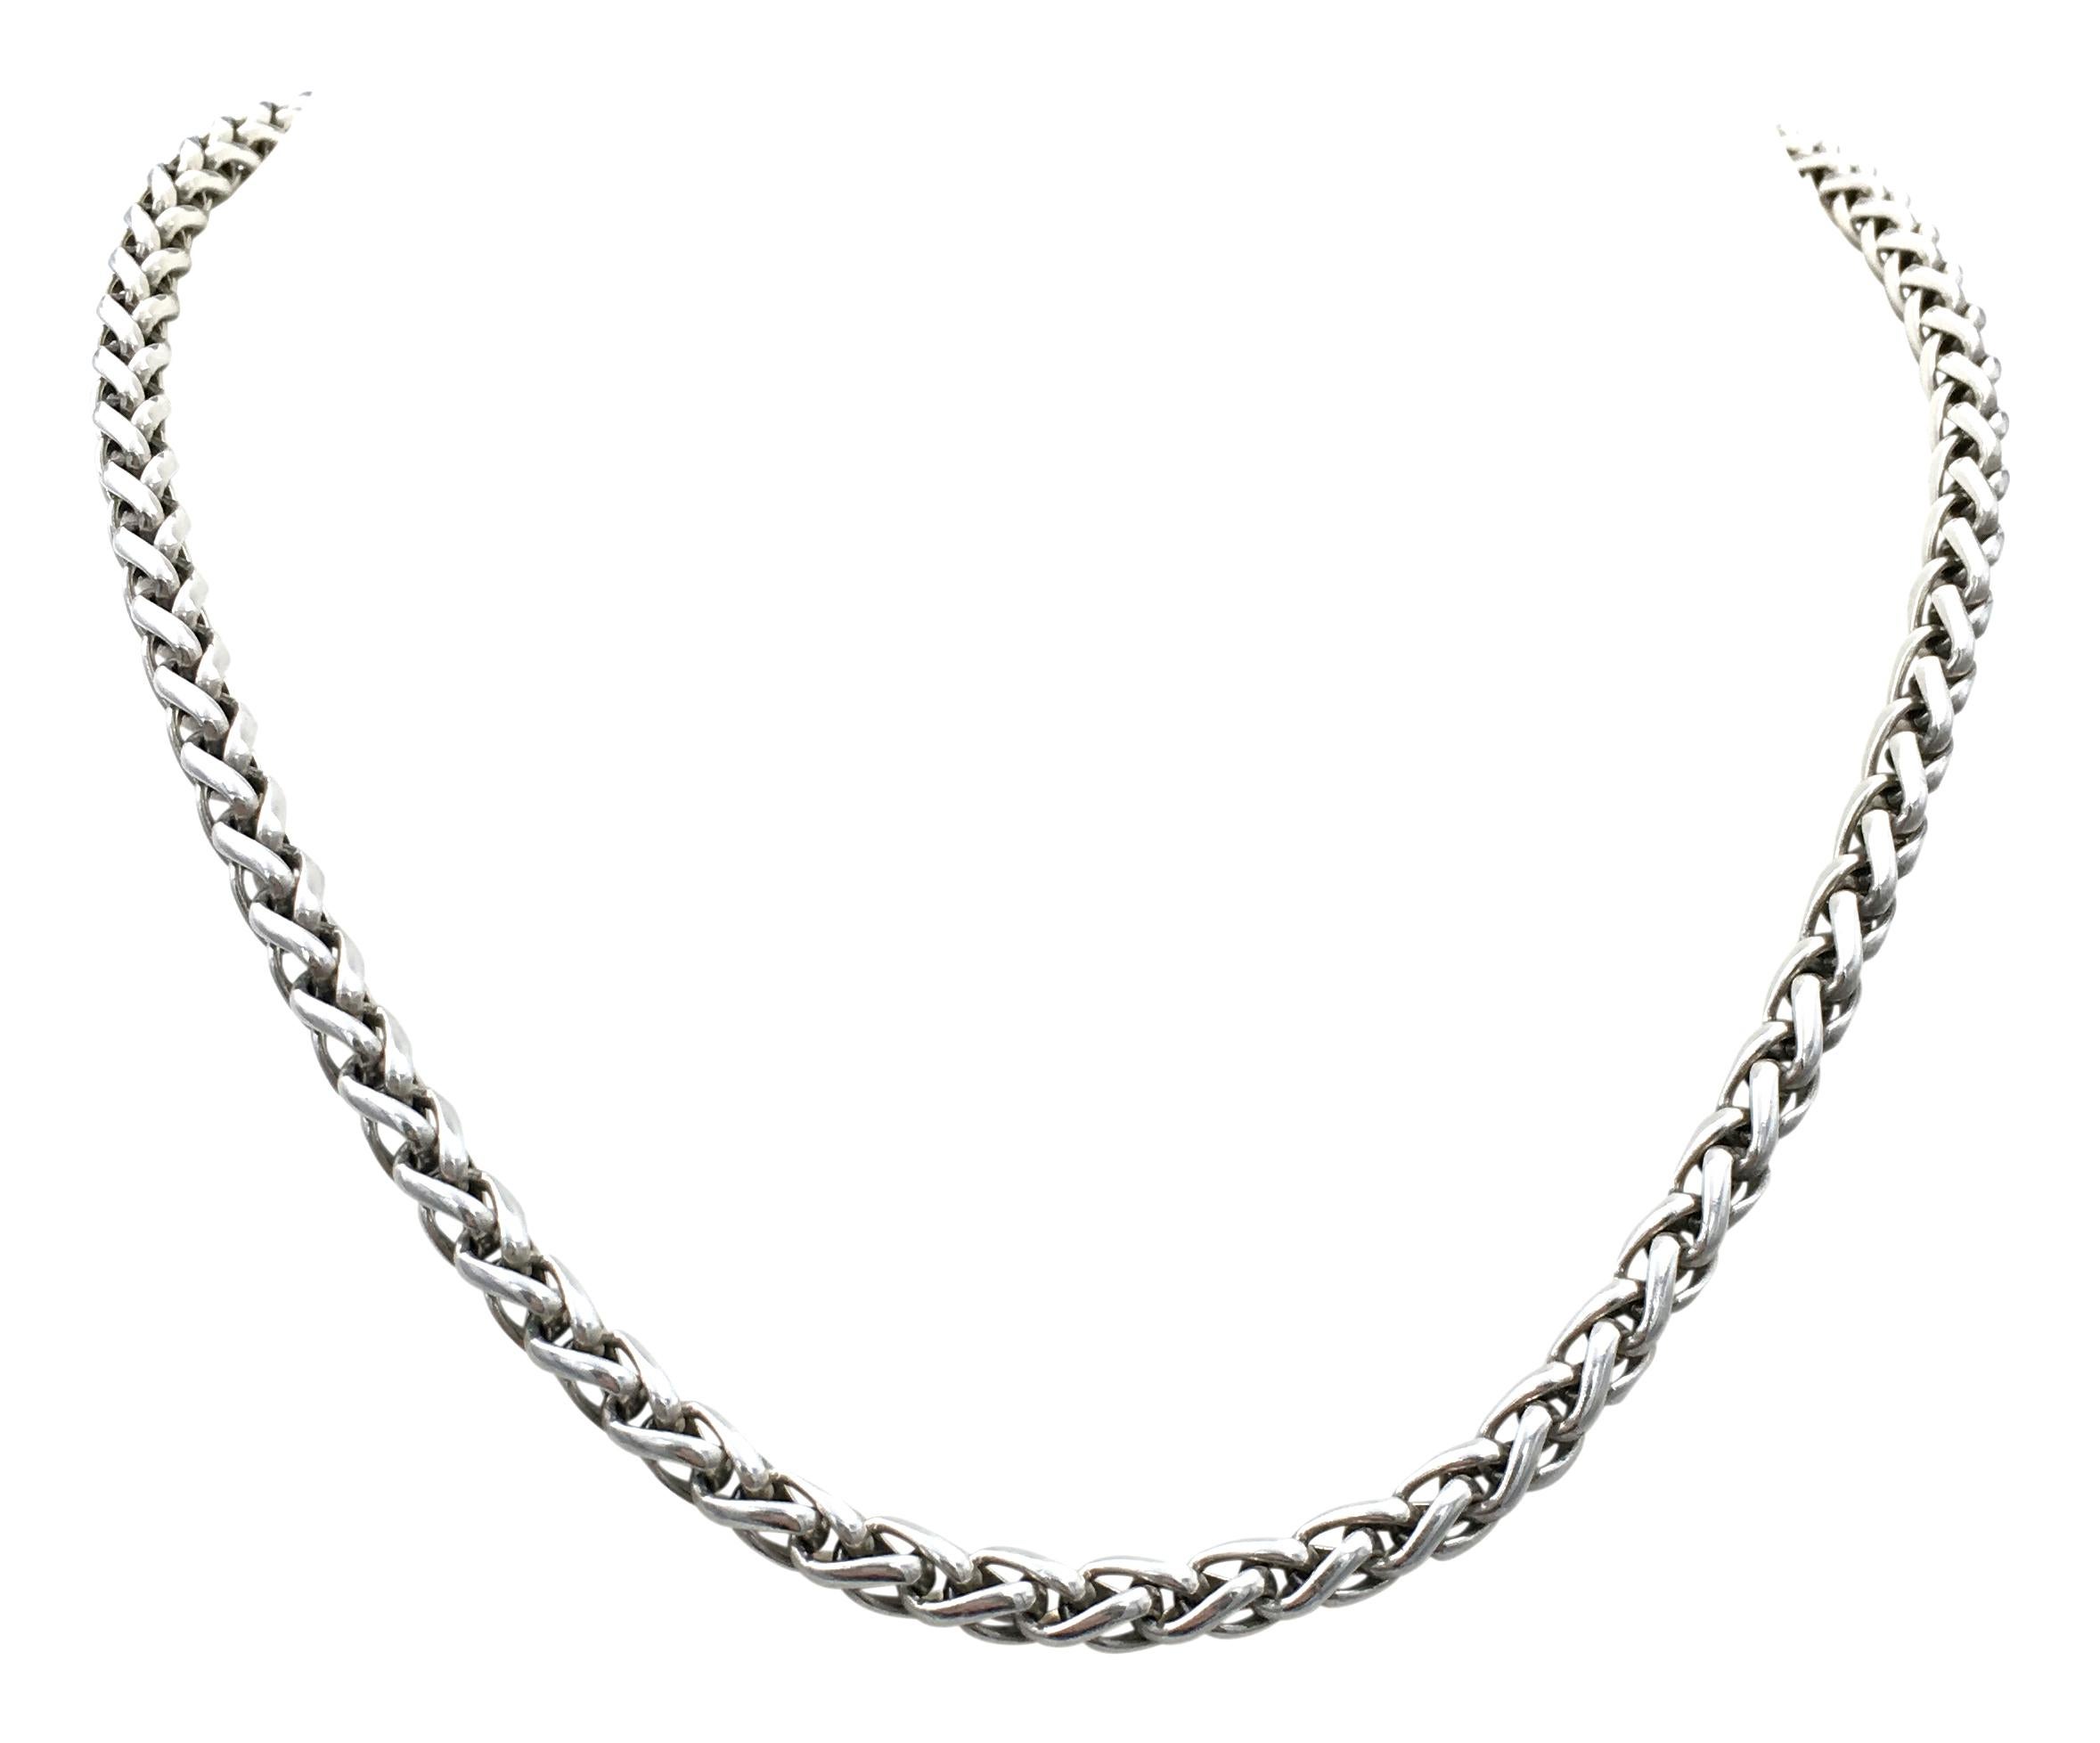 Authentic David Yurman sterling silver long wheat chain. The necklace is 17.5 inches in length. Signed D.Y. 925. Does not come with original box or papers. 